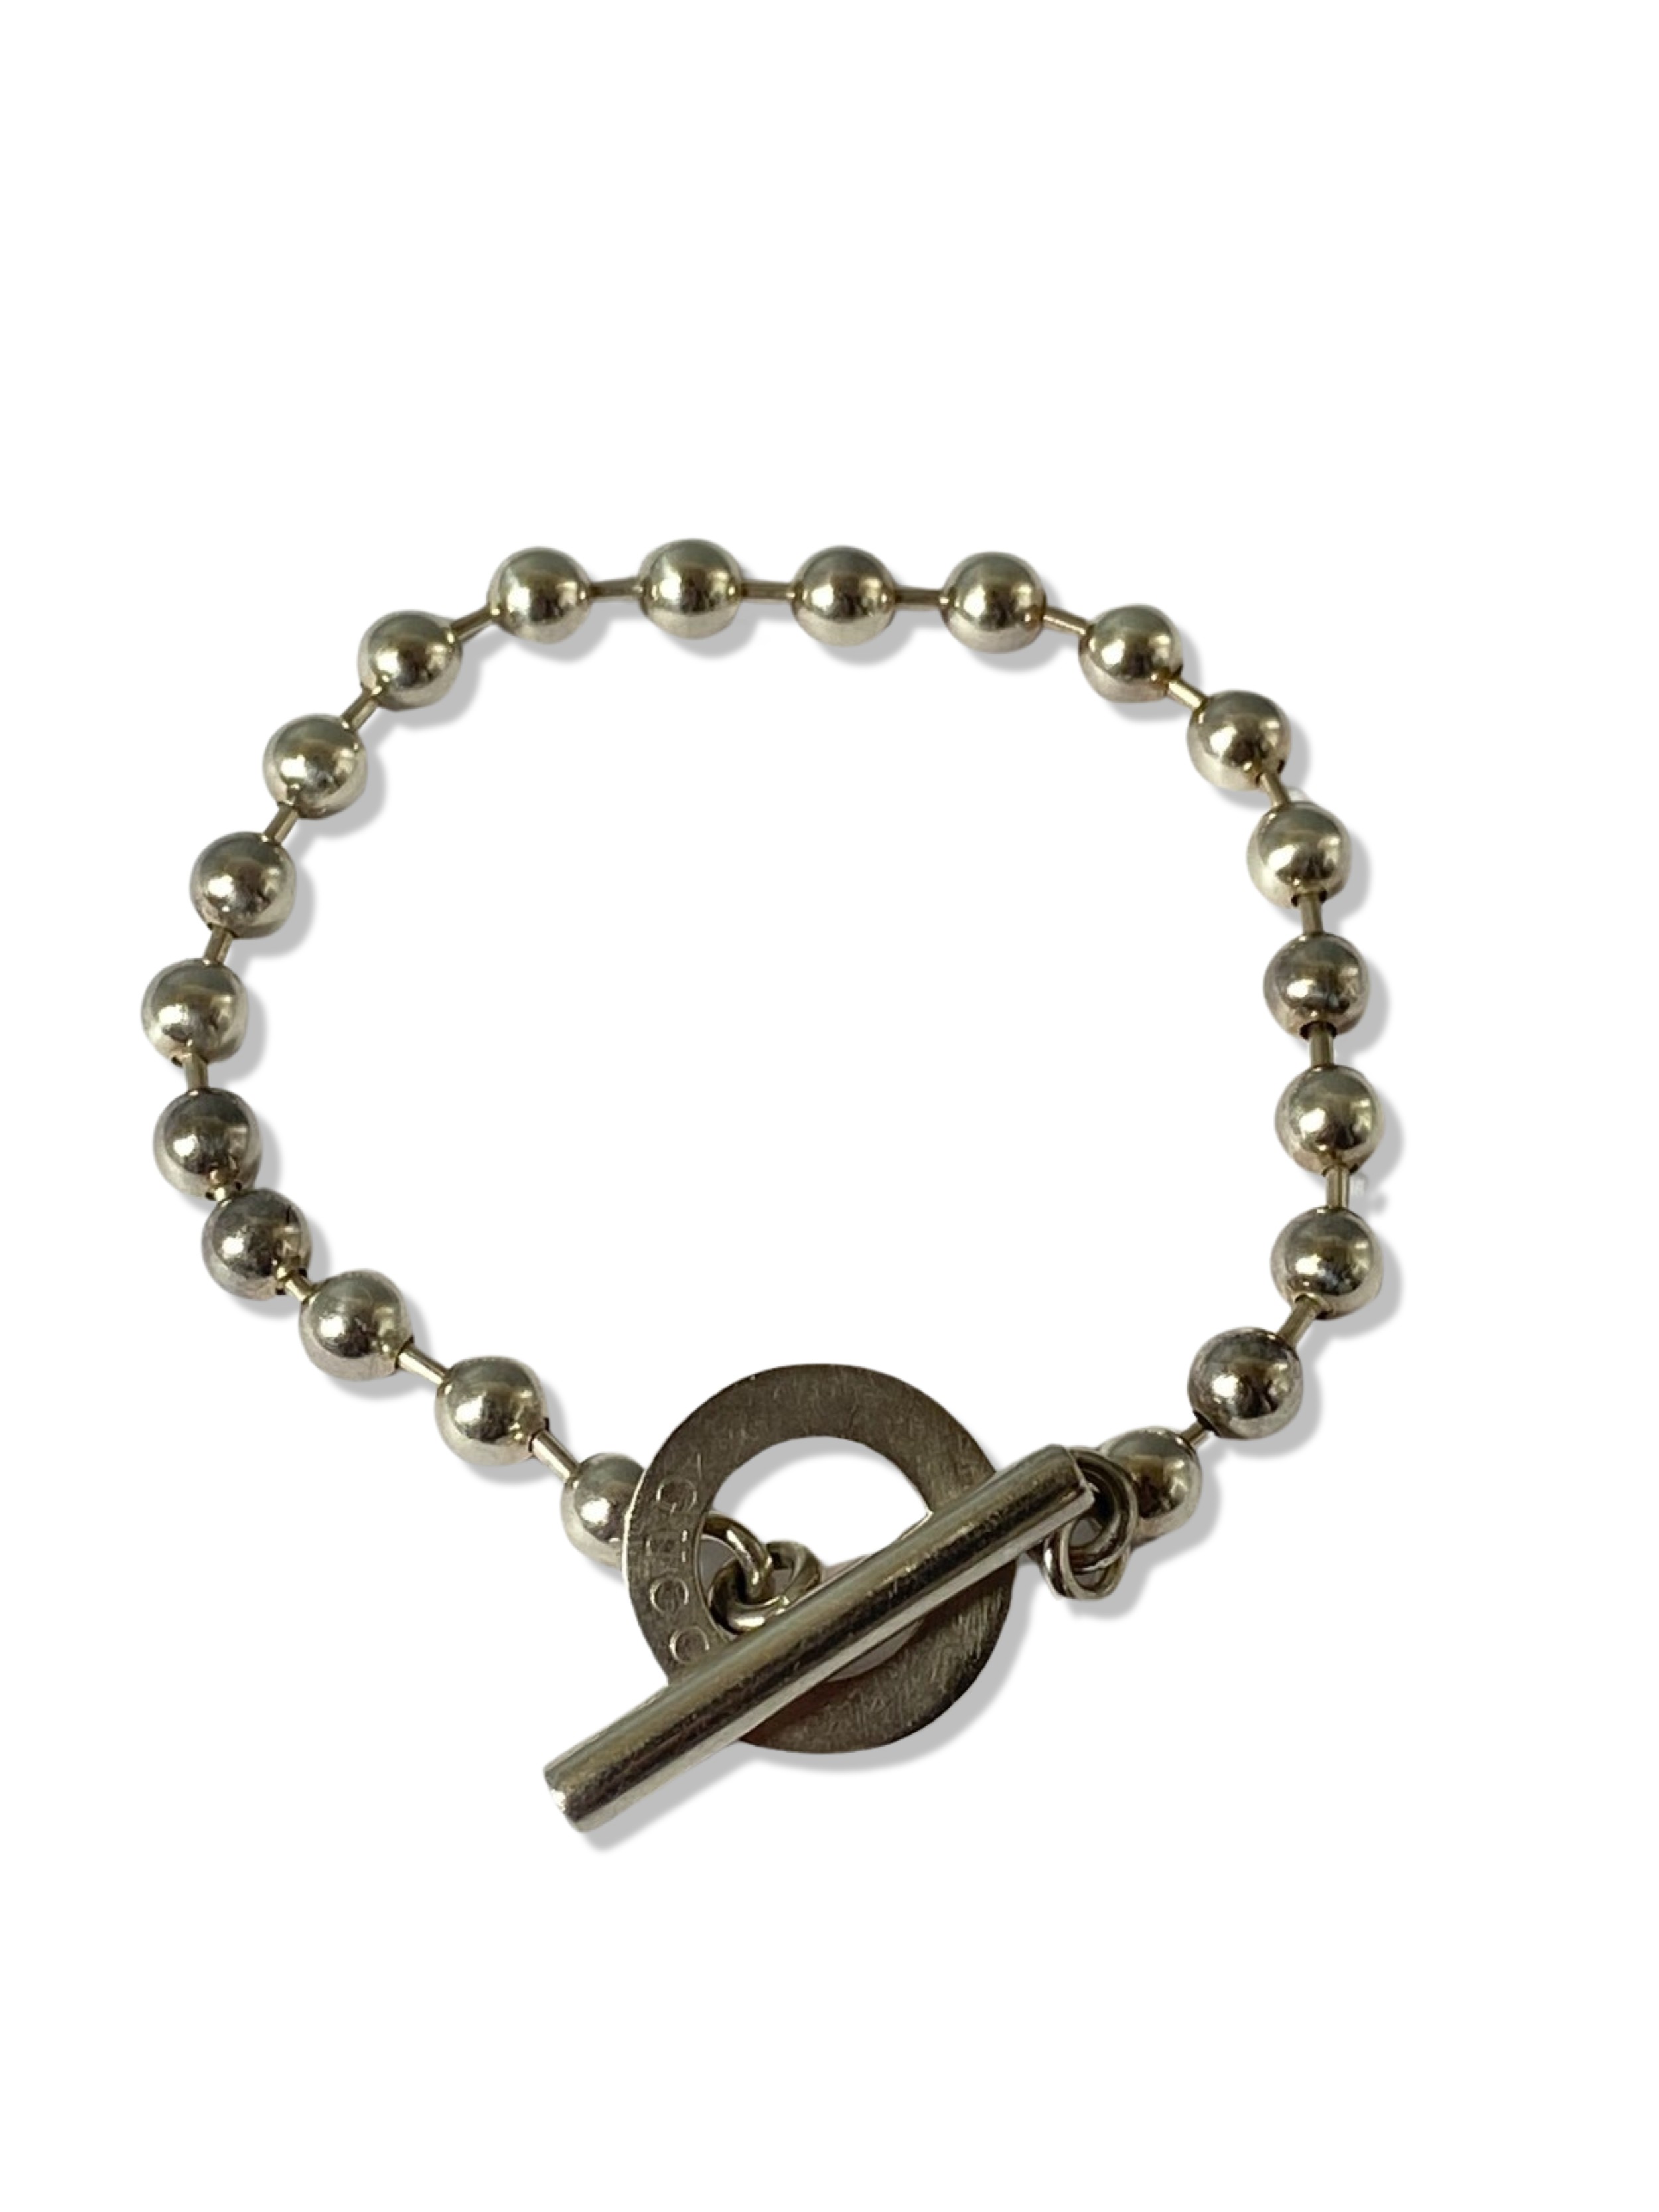 Gucci Silver bead bracelet weighing 13.53 grams and 19.5cm in length